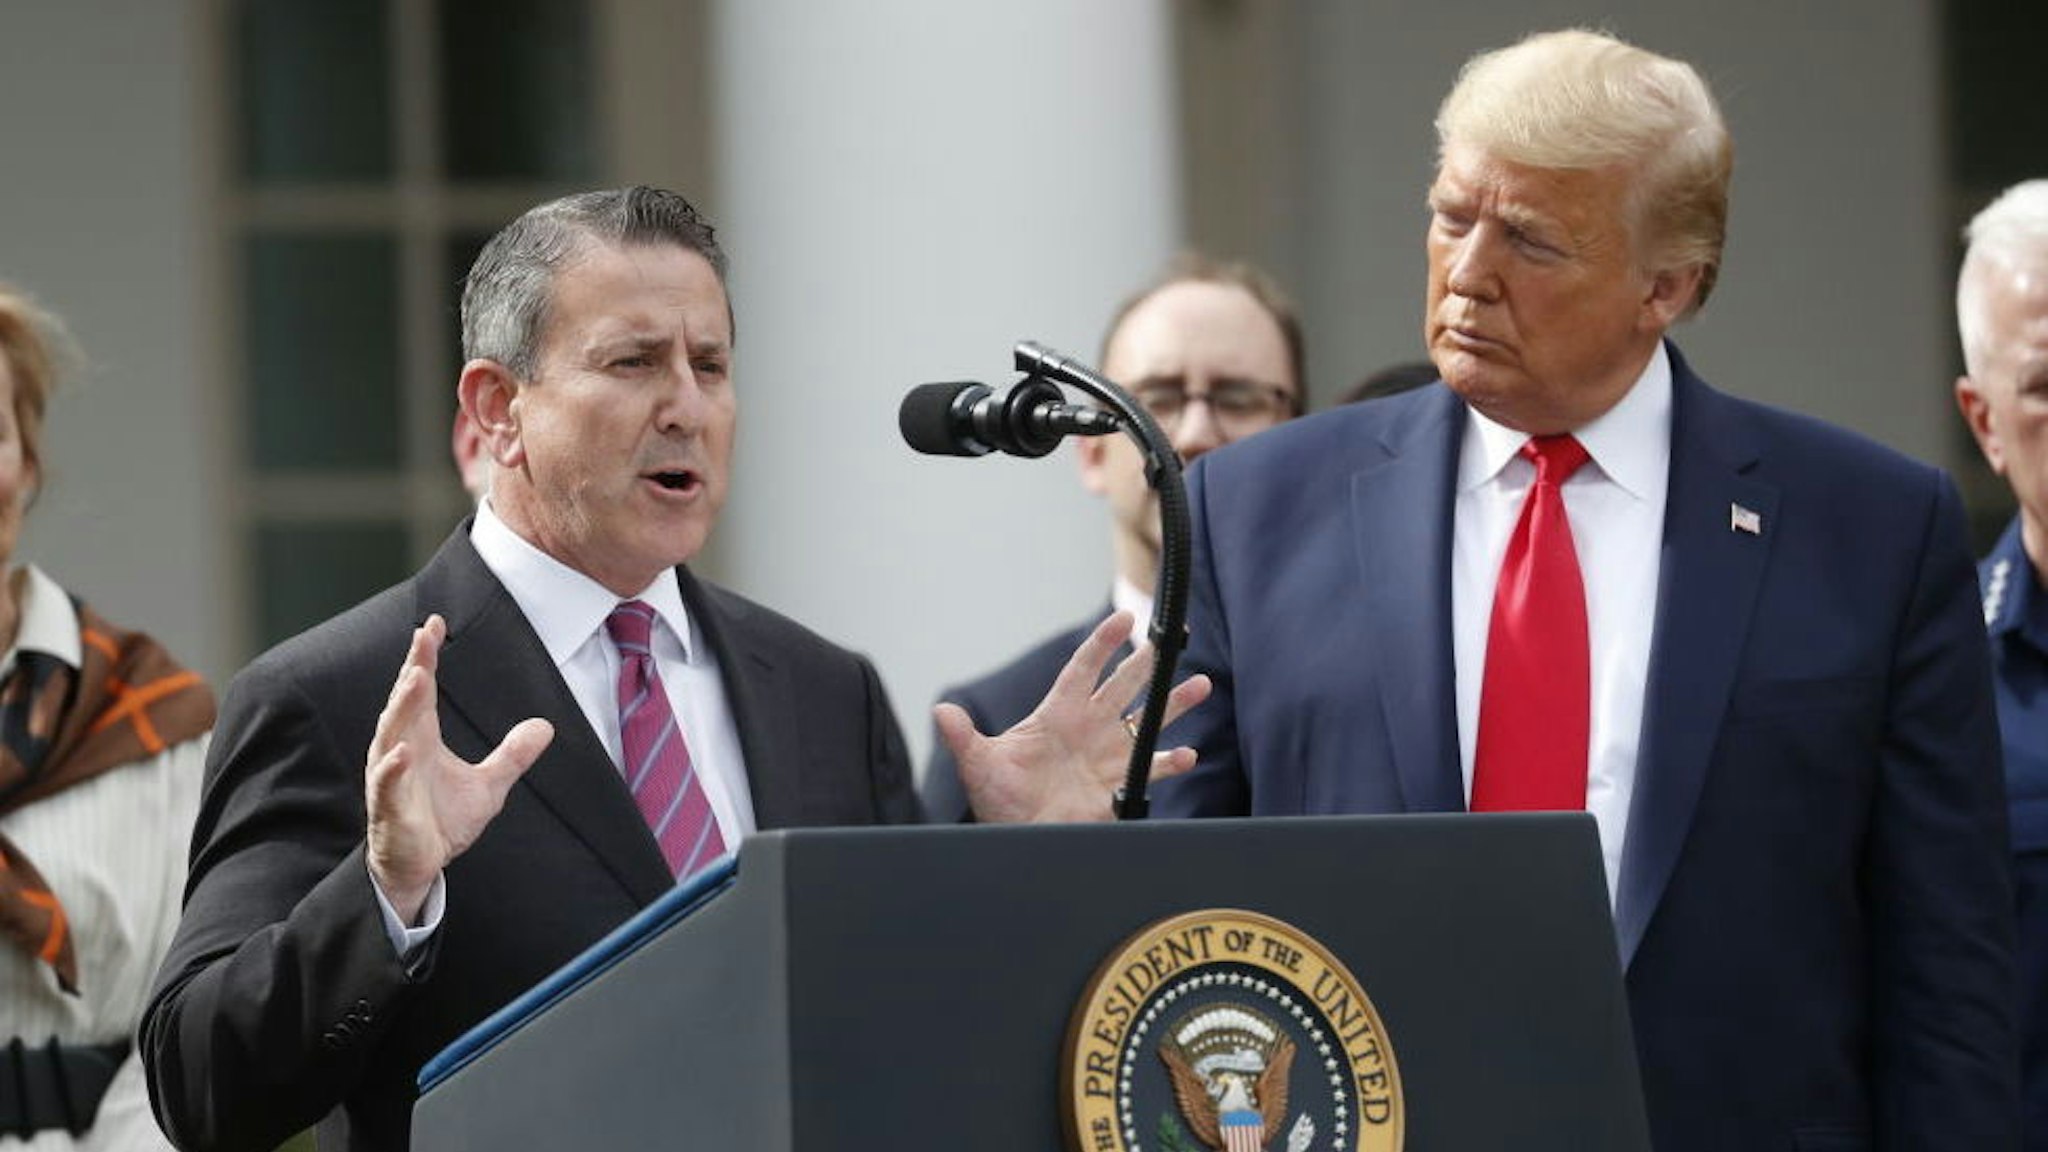 Brian Cornell, chief executive officer and chairman of Target Corp., left, speaks during a news conference with U.S. President Donald Trump in the Rose Garden of the White House in Washington, D.C., U.S., on Friday, March 13, 2020. Trump declared a national emergency over the coronavirus outbreak to allow for more federal aid for states and municipalities. Photographer: Andrew Harrer/Bloomberg